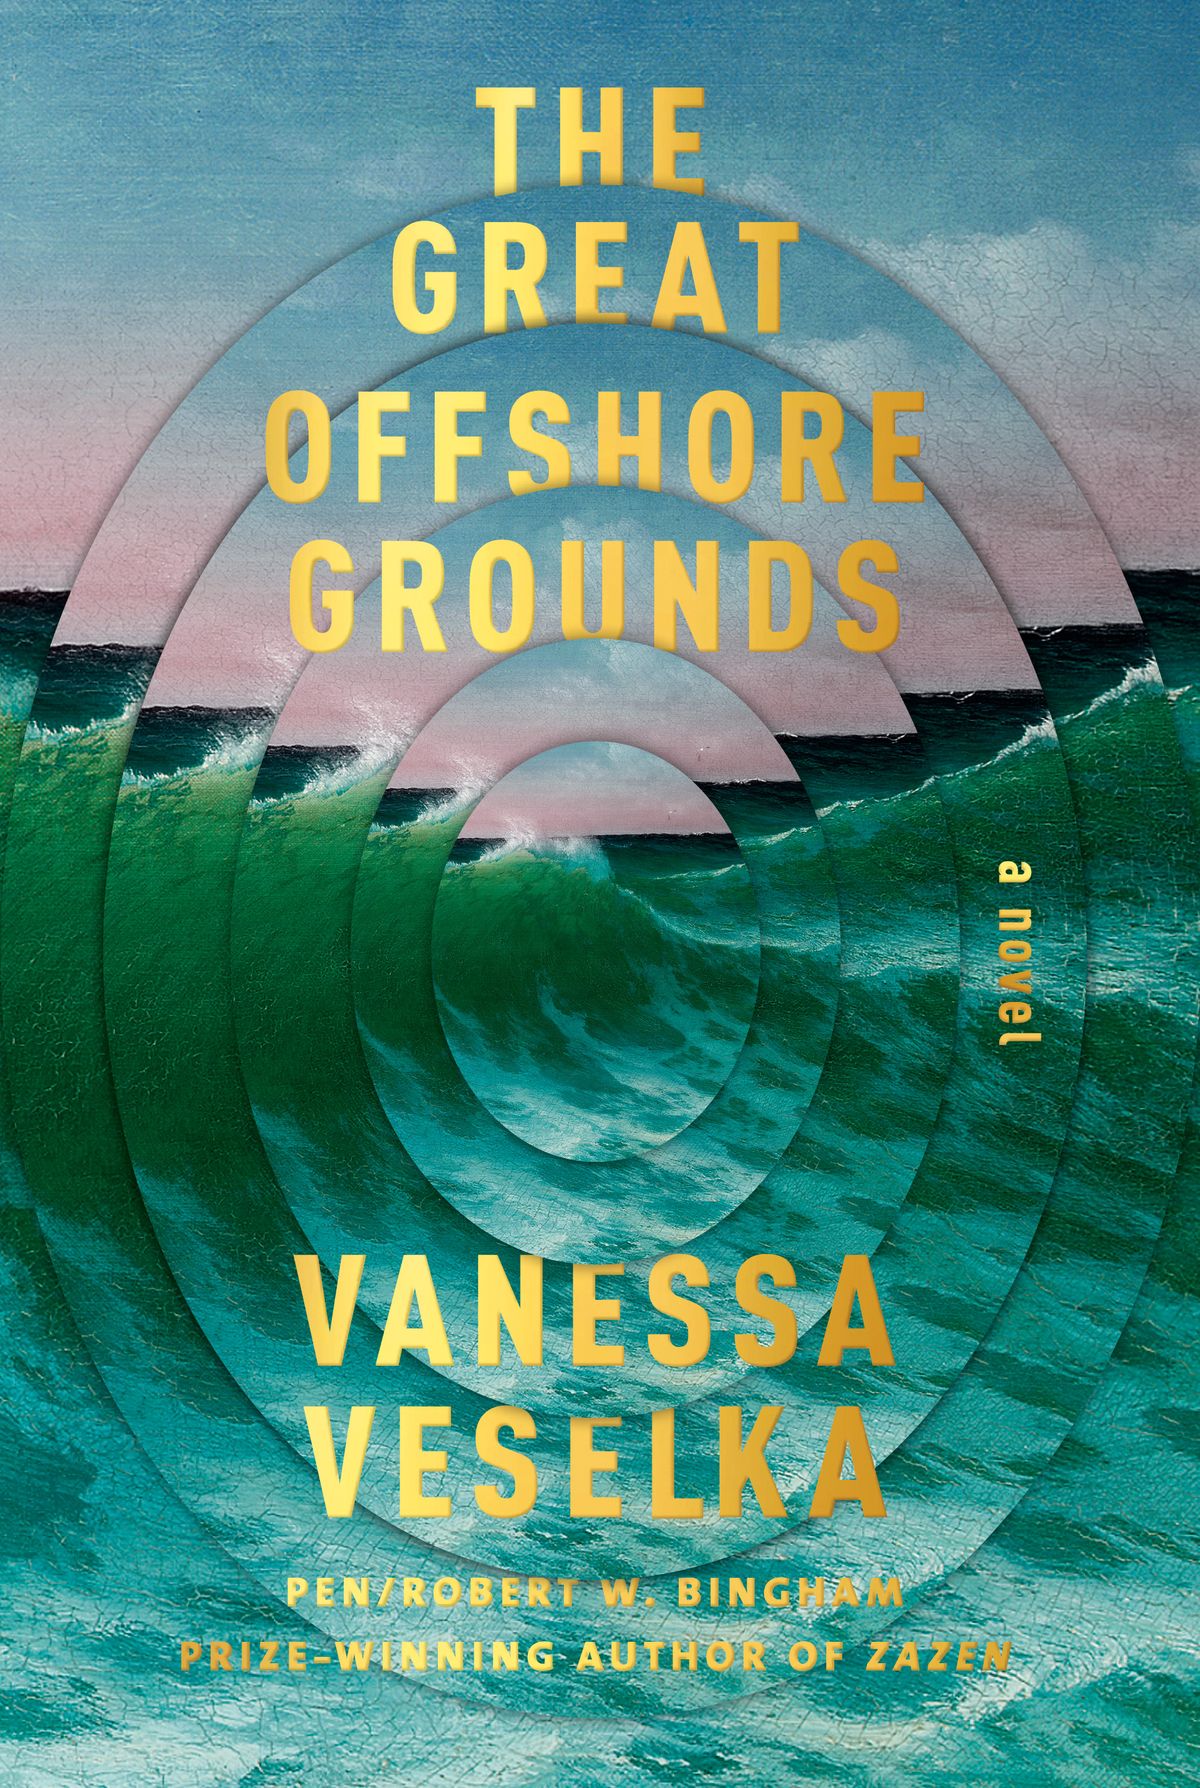 “The Great Offshore Grounds” by Vanessa Veselka  (Courtesy)